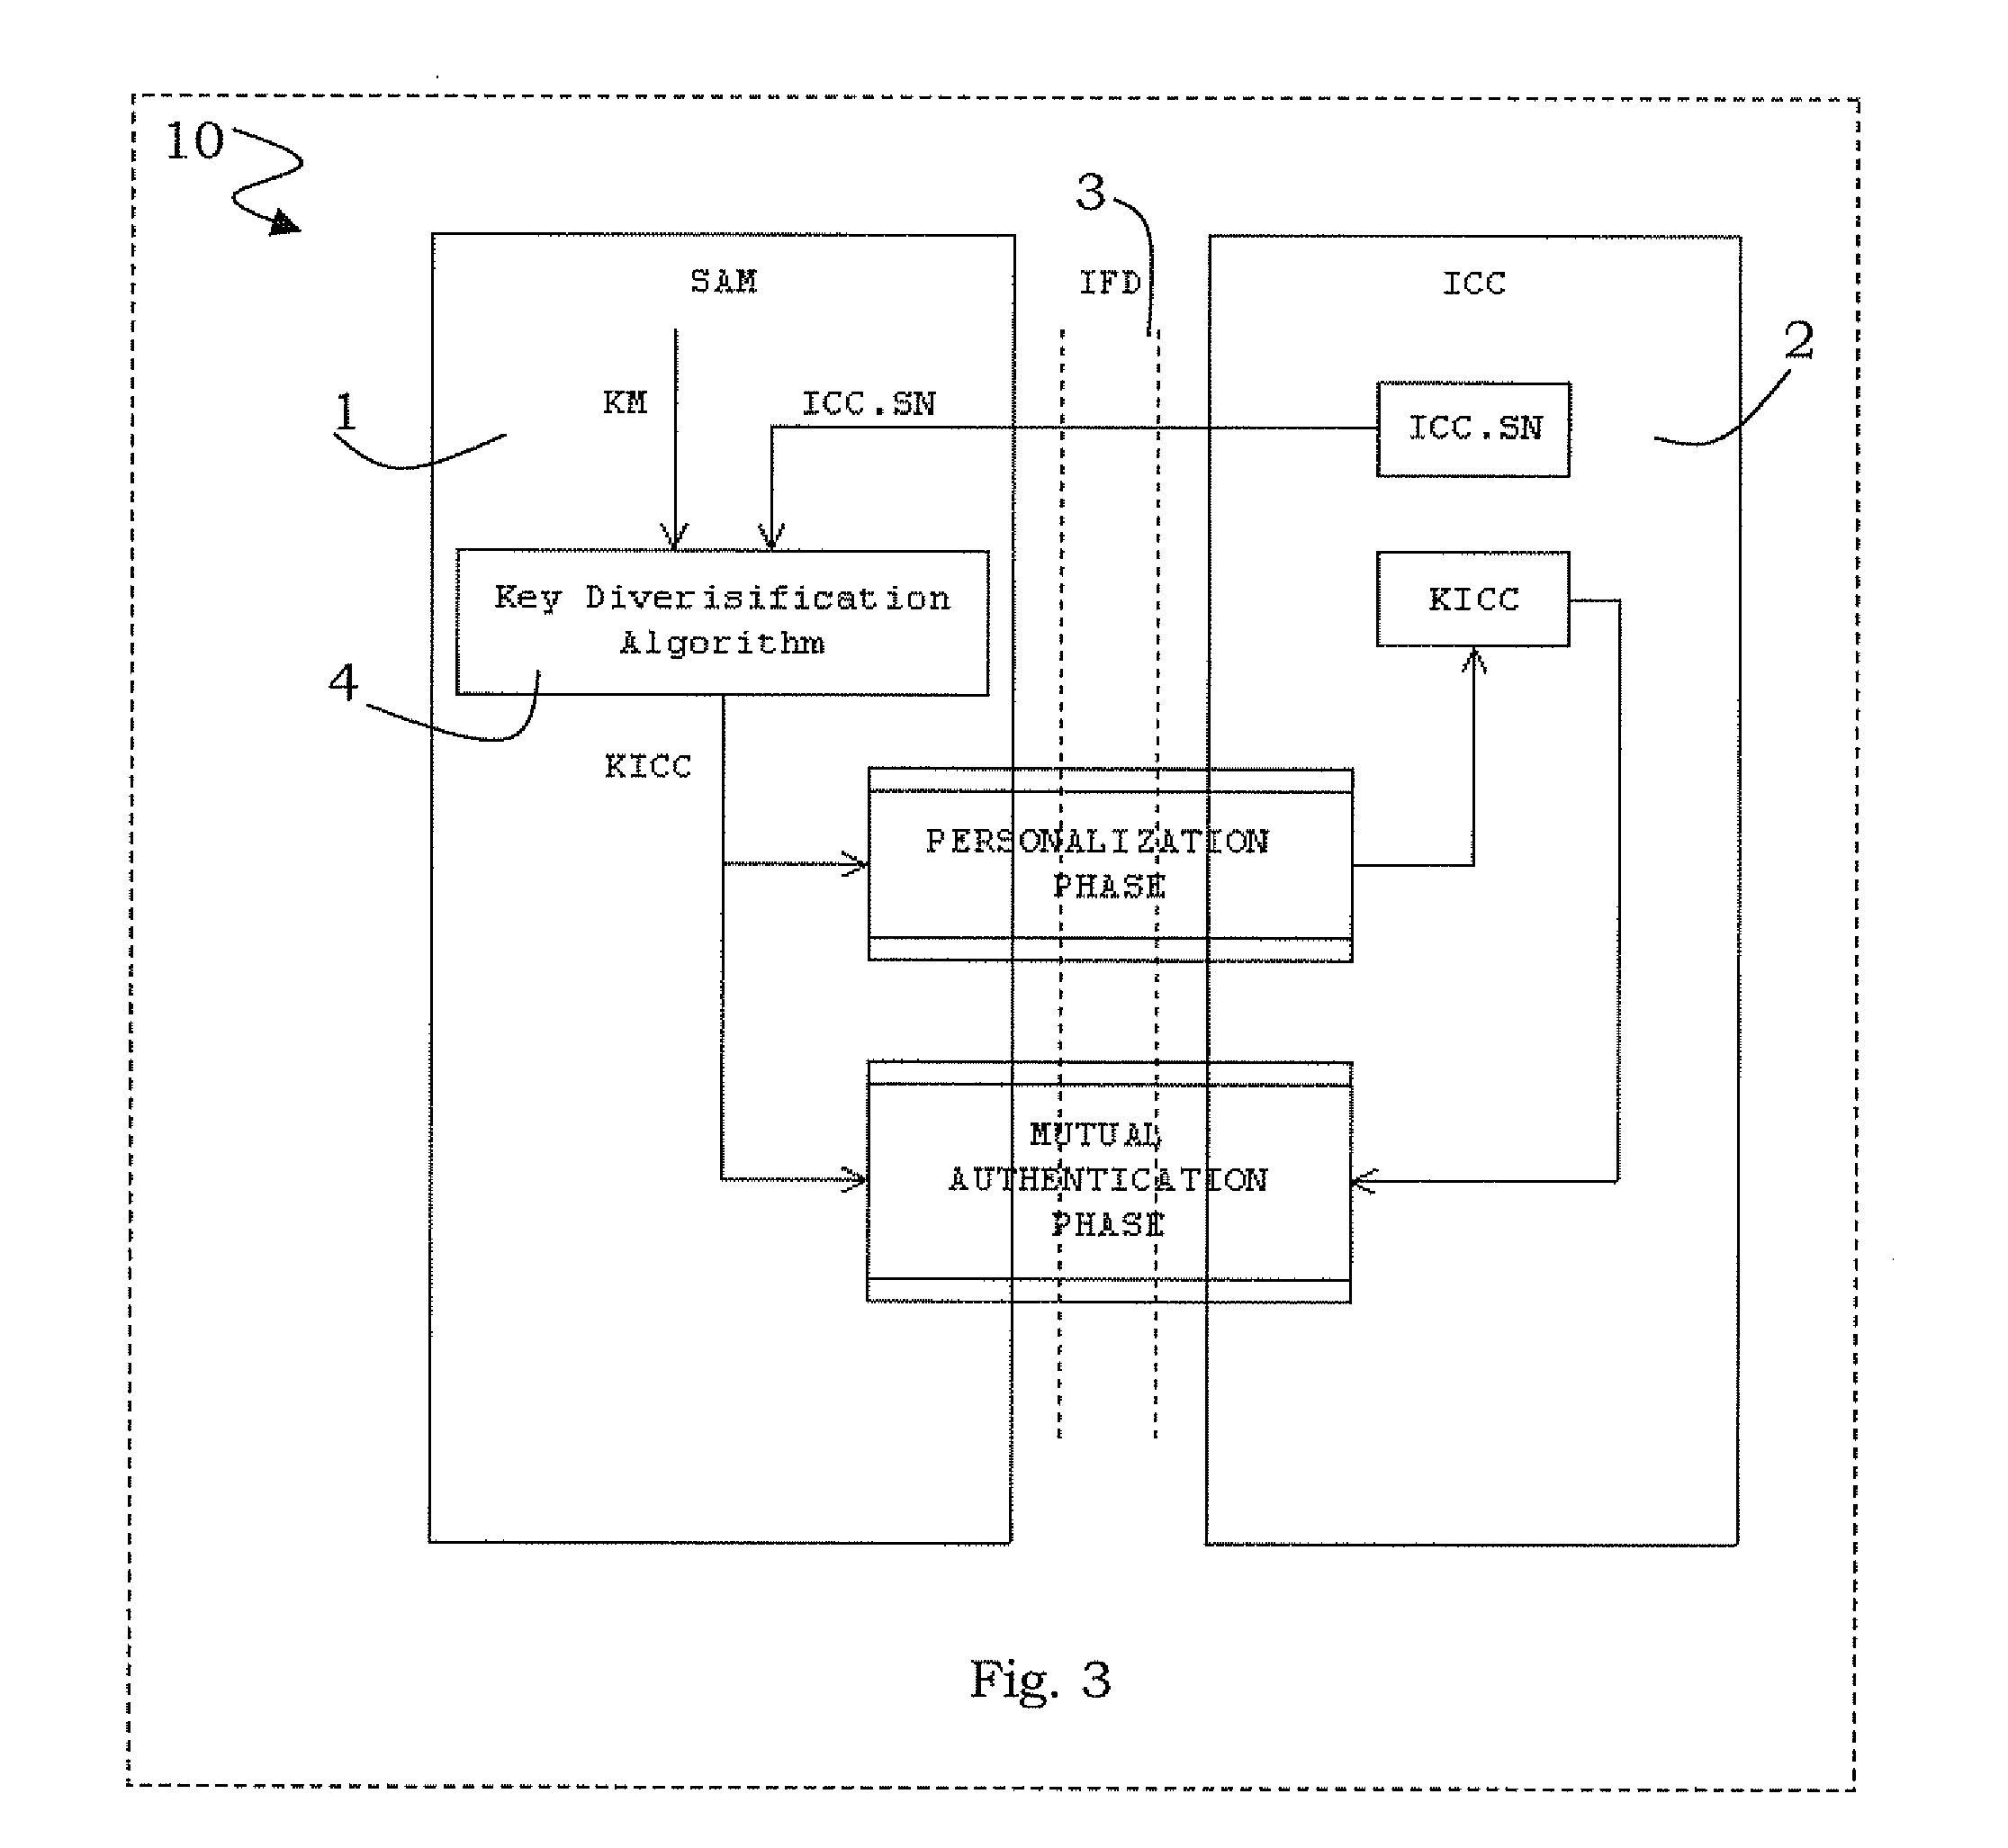 Method for key diversification on an IC card